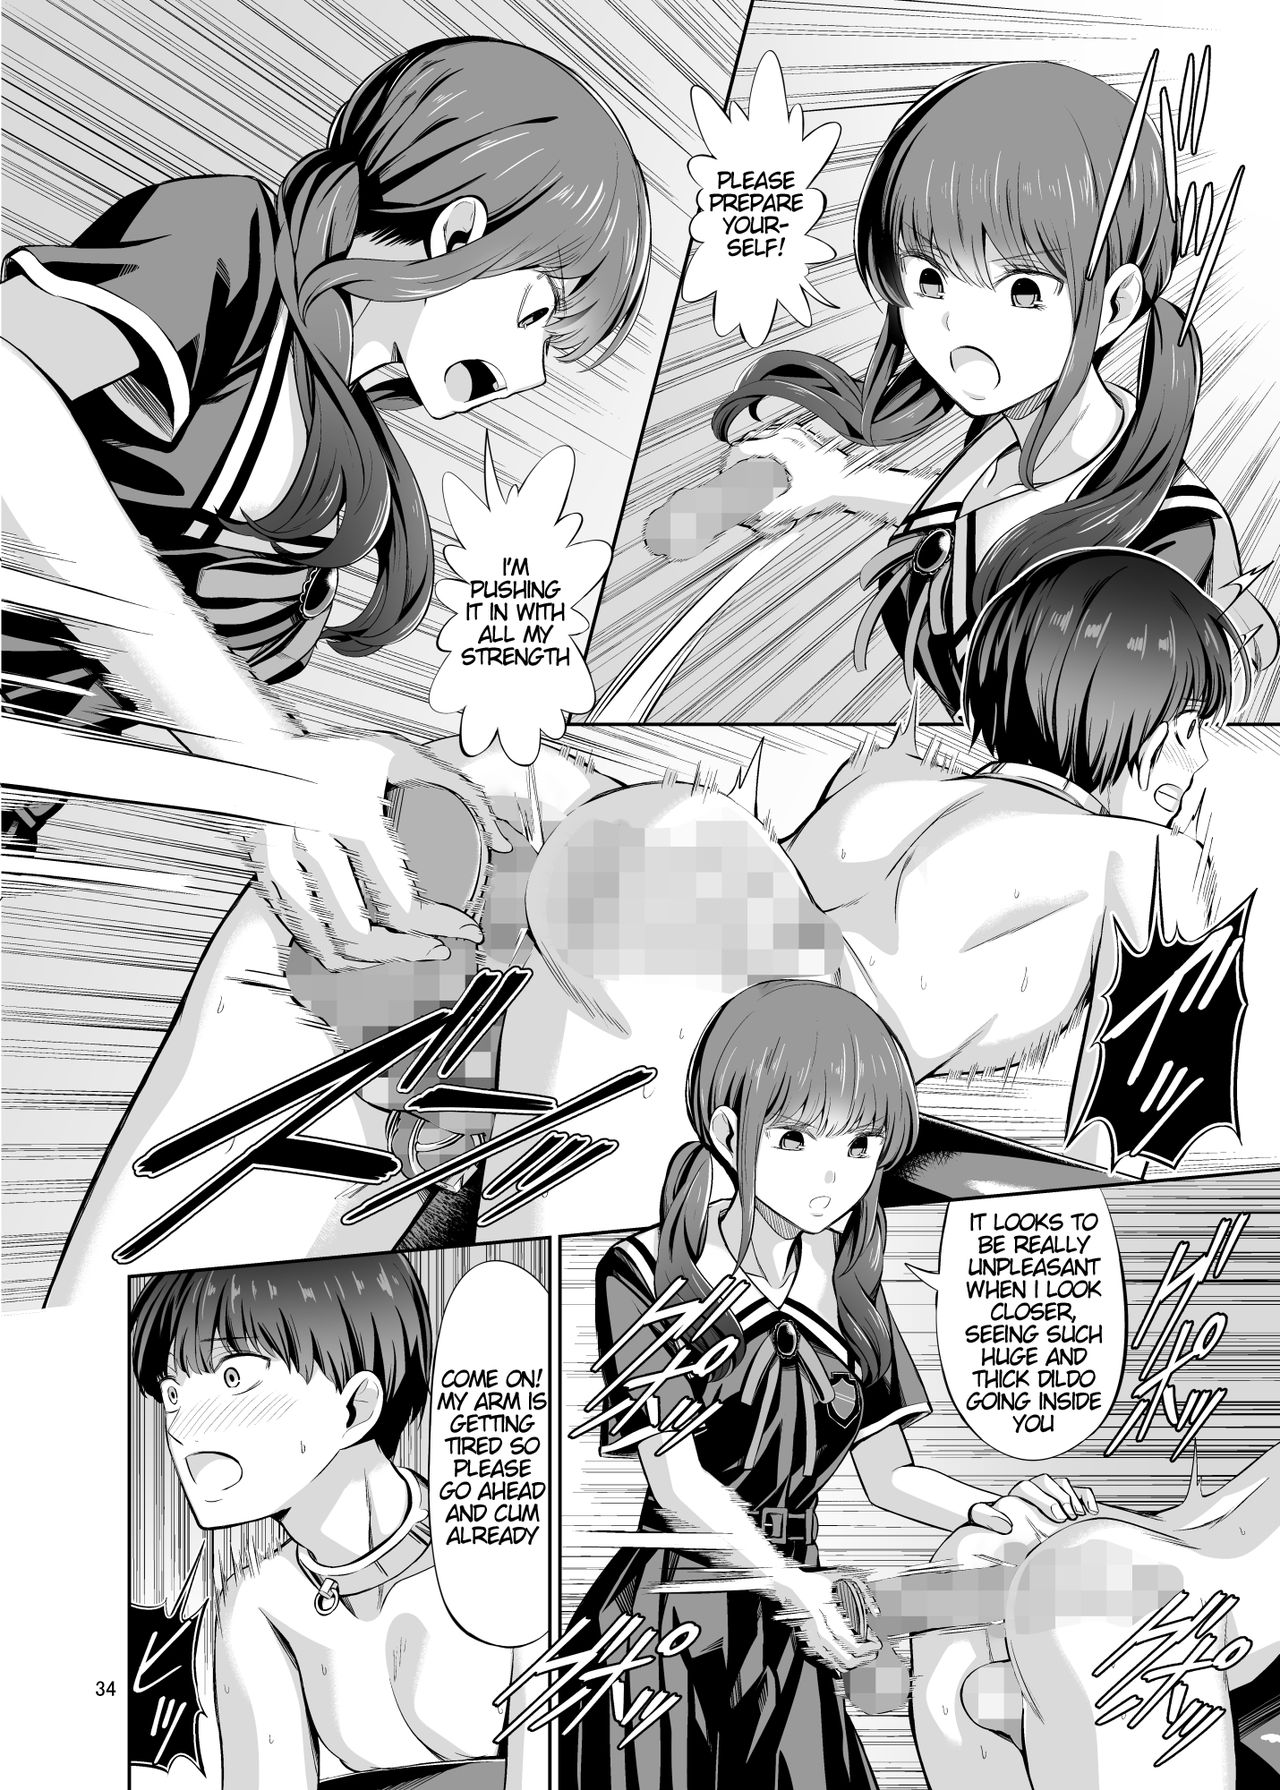 [Yamahata Rian] Tensuushugi no Kuni Kouhen | A Country Based on Point System Sequel [English] page 35 full